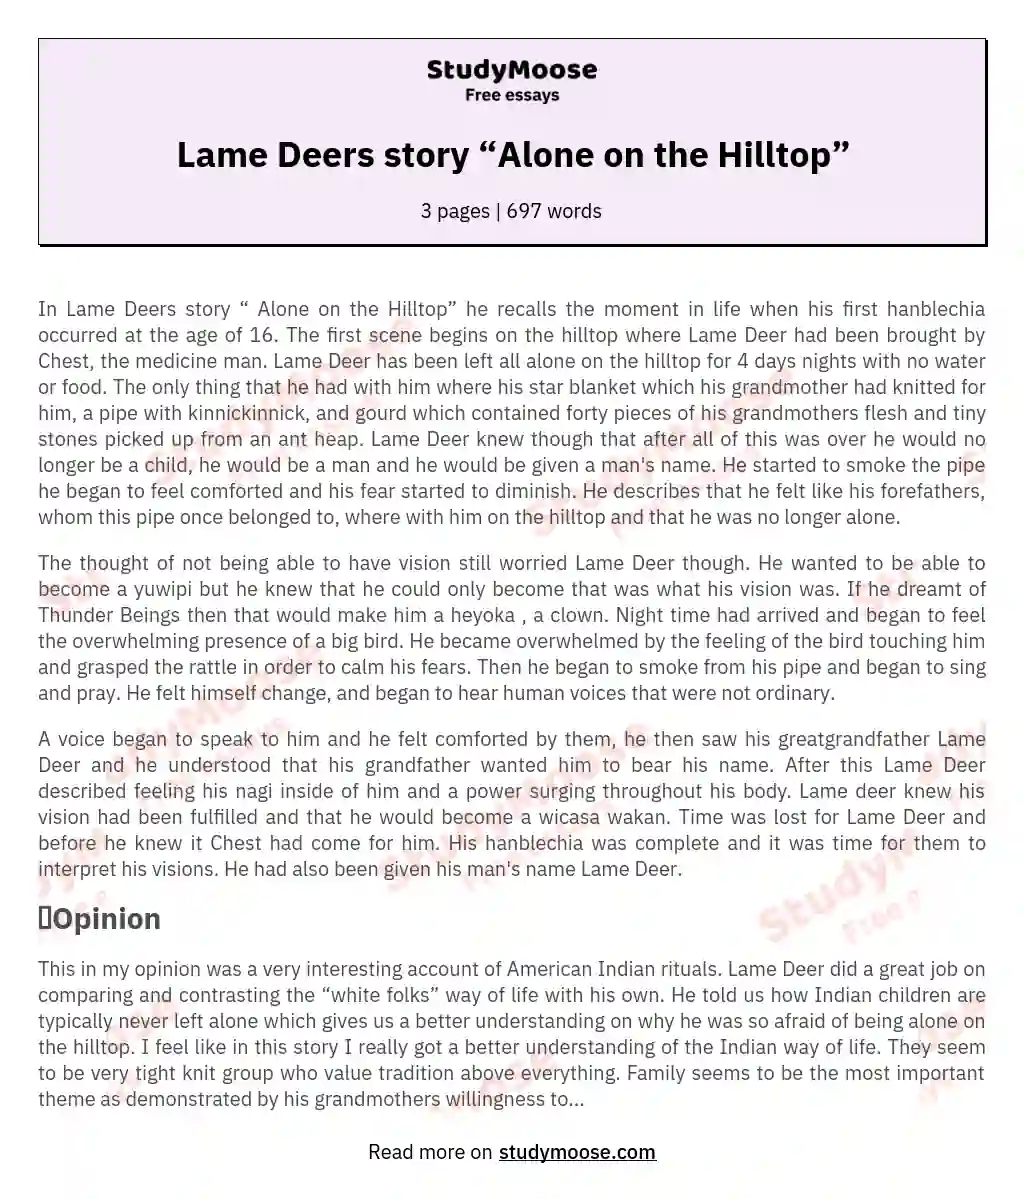 Lame Deers story “Alone on the Hilltop” essay